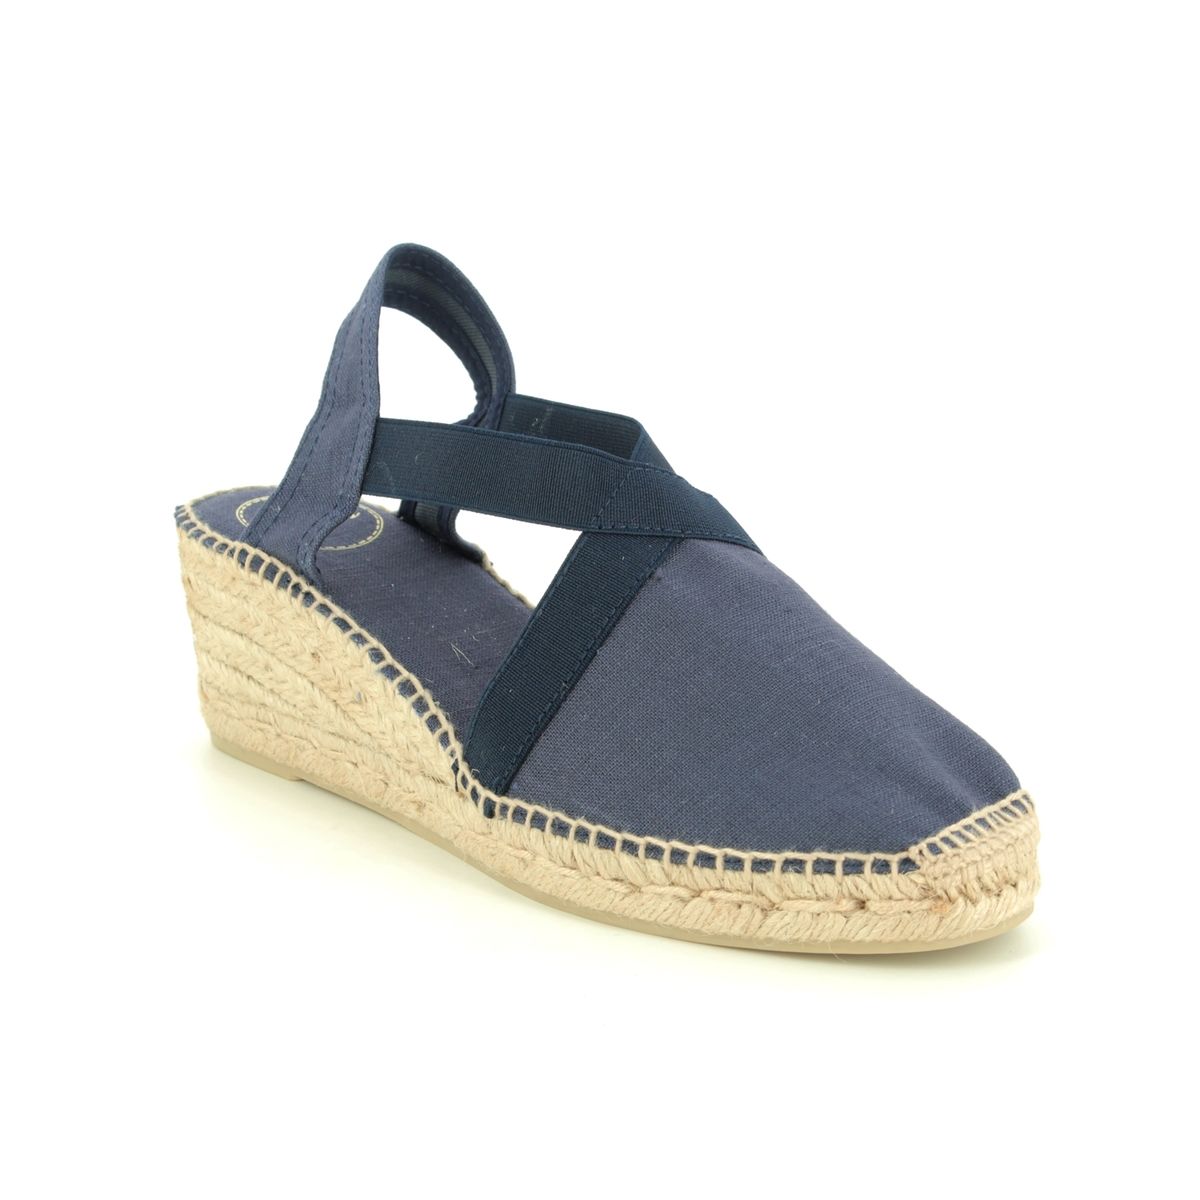 Toni Pons Ter Navy Womens Espadrilles 1003-70 in a Plain Textile in Size 41